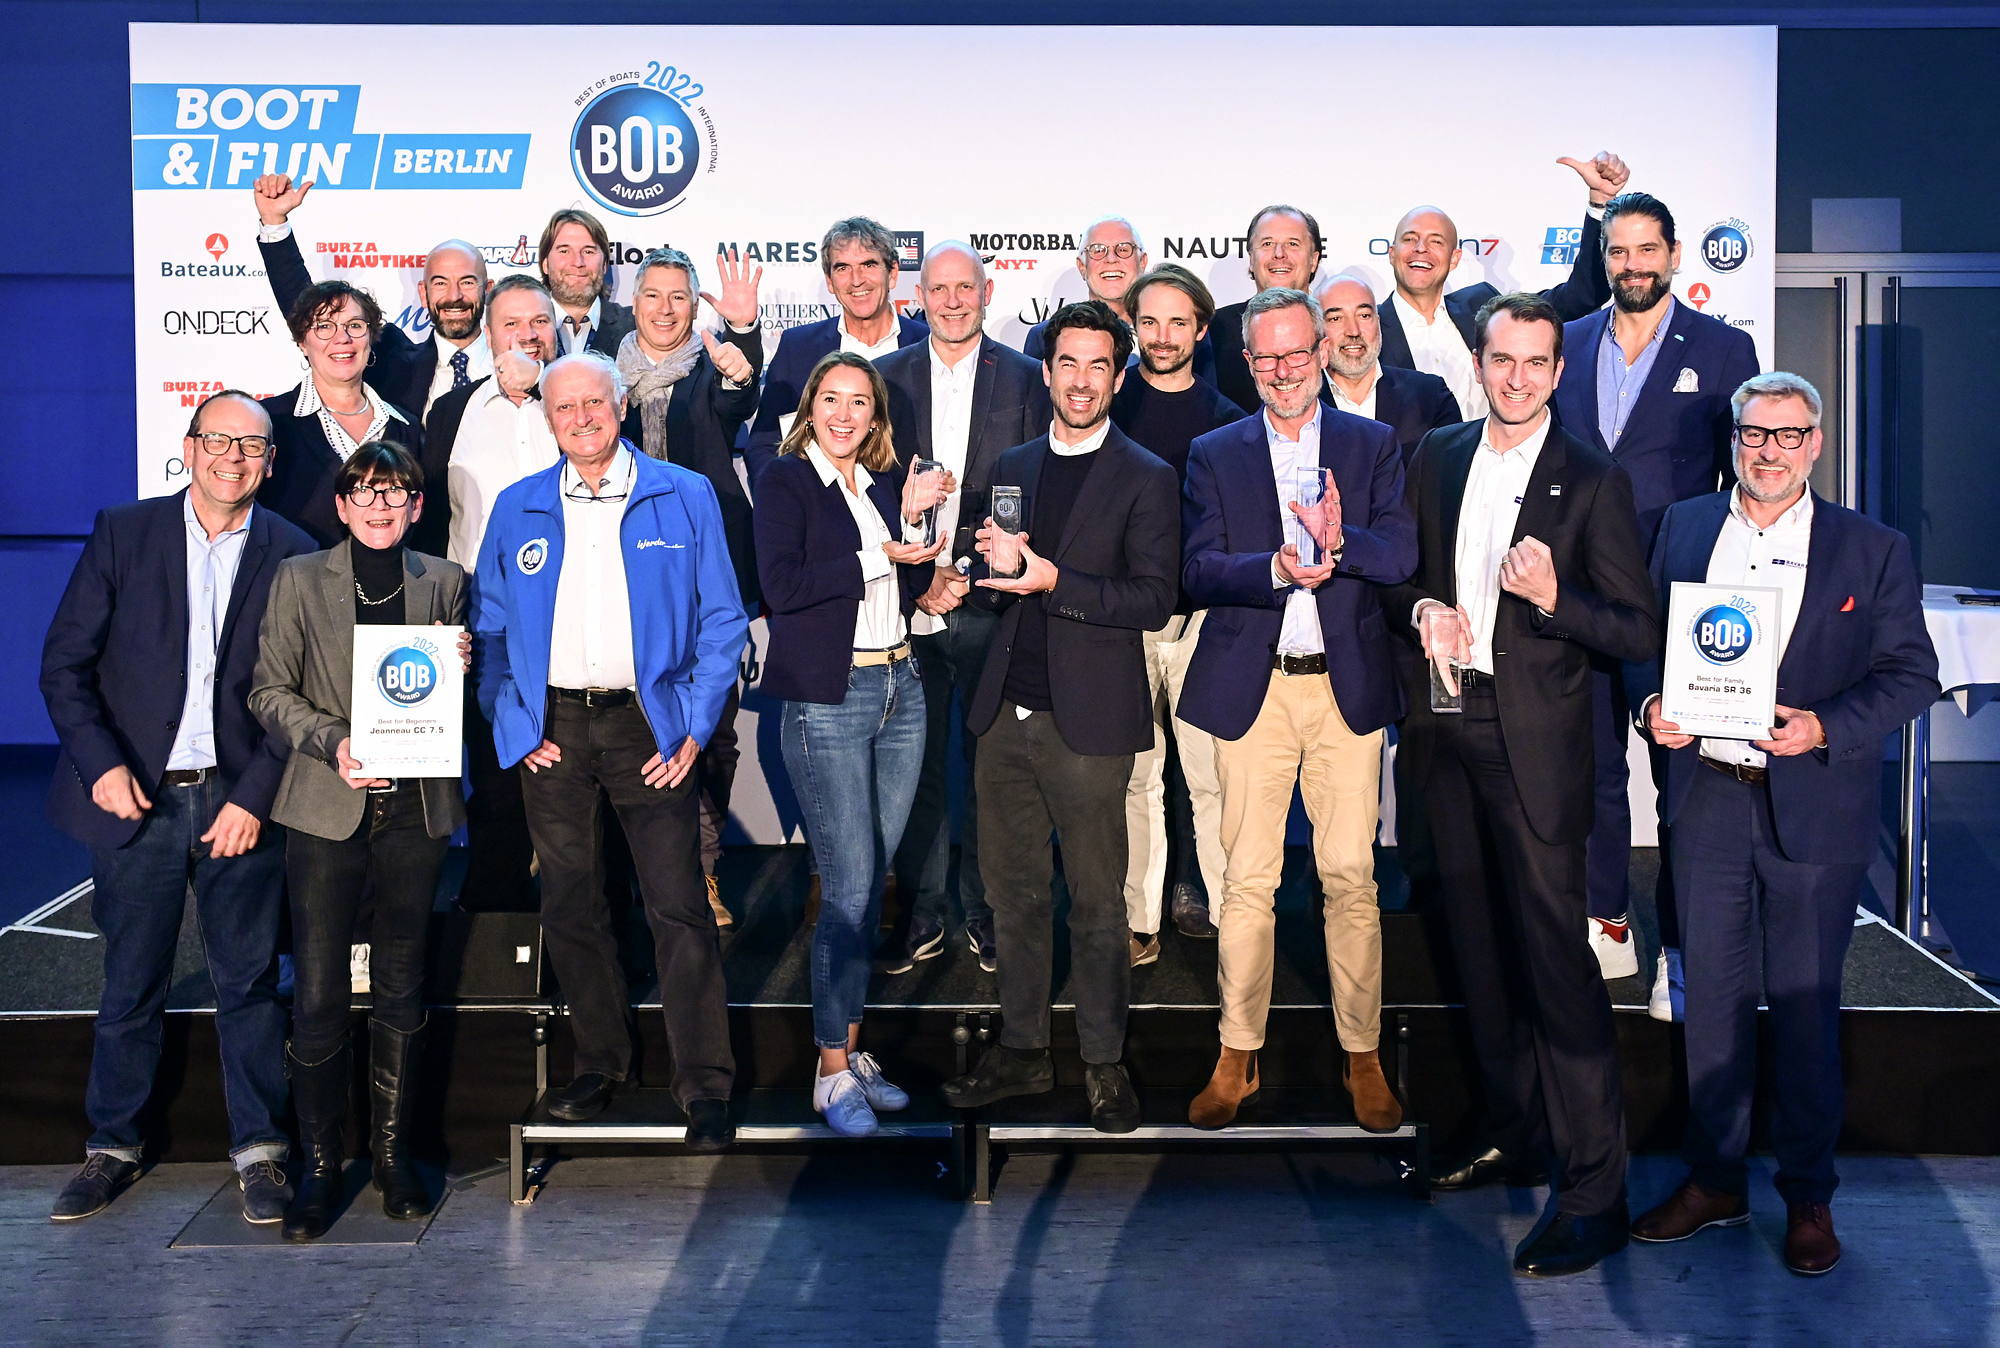 The winners and jury members of the Best of Boats Award 2022 standing on stage with their awards, smiling.